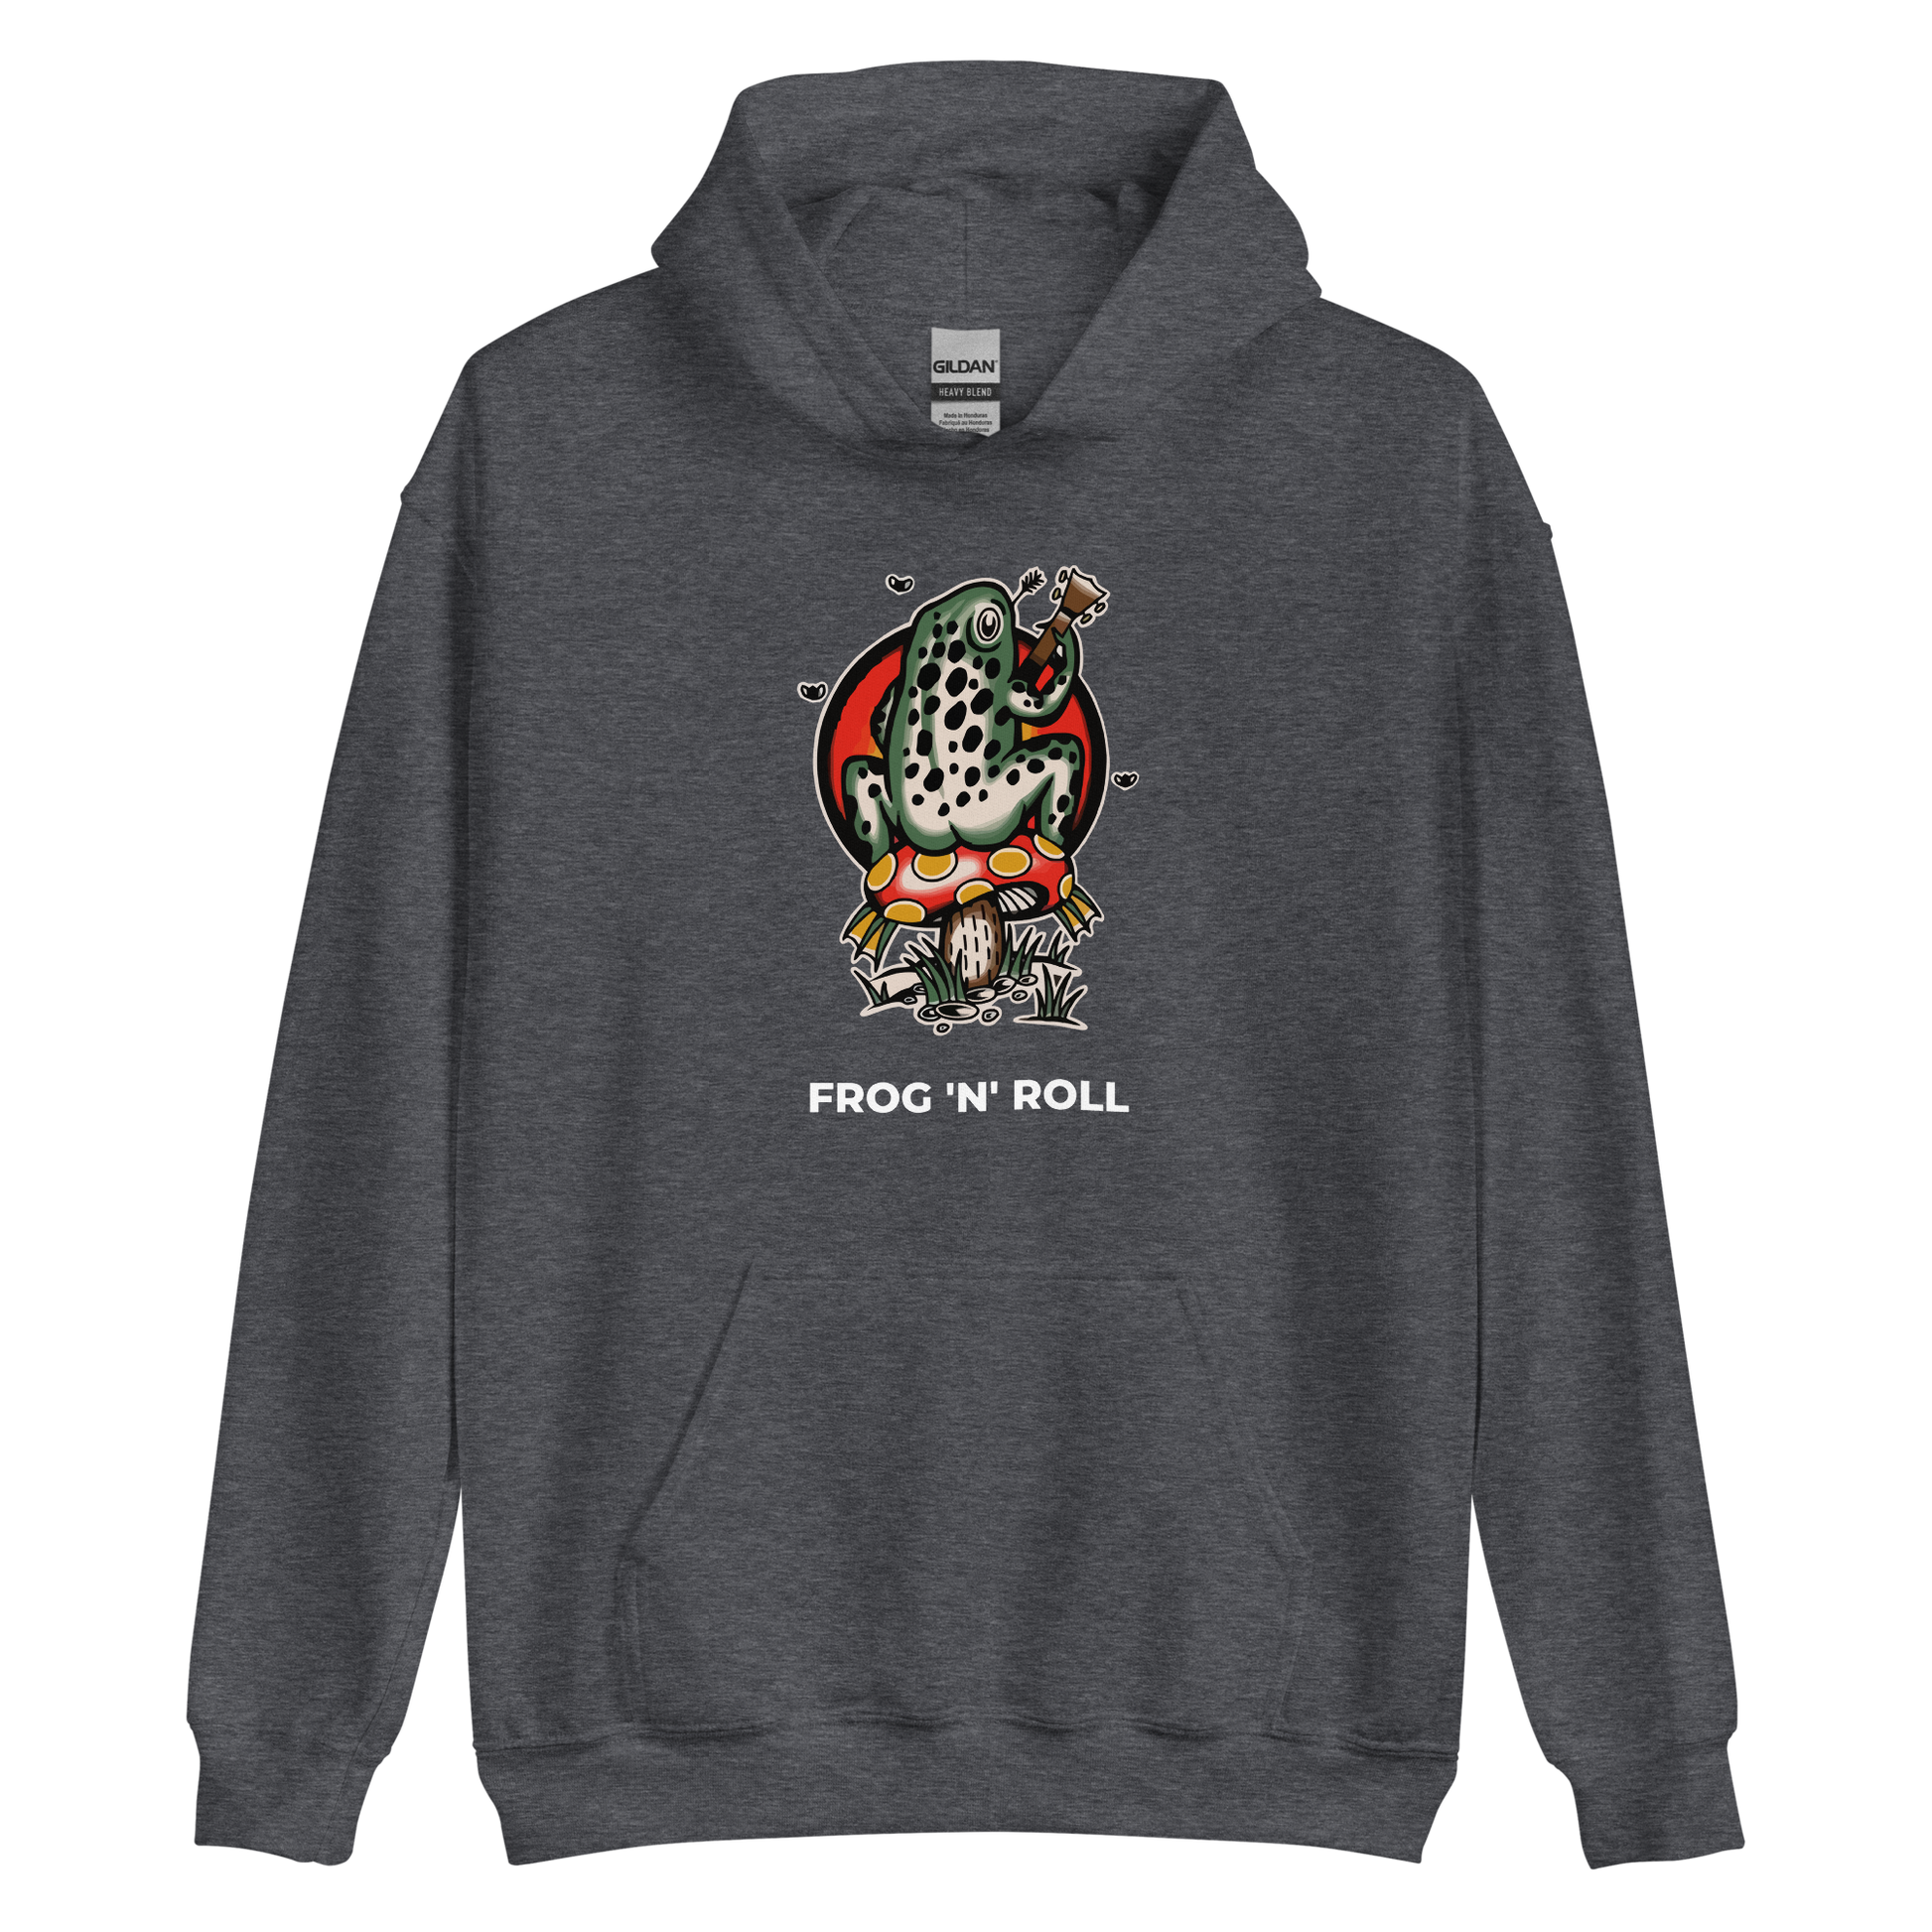 Dark Heather Frog Hoodie featuring the hilarious Frog 'n' Roll graphic on the chest - Funny Graphic Frog Hoodies - Boozy Fox